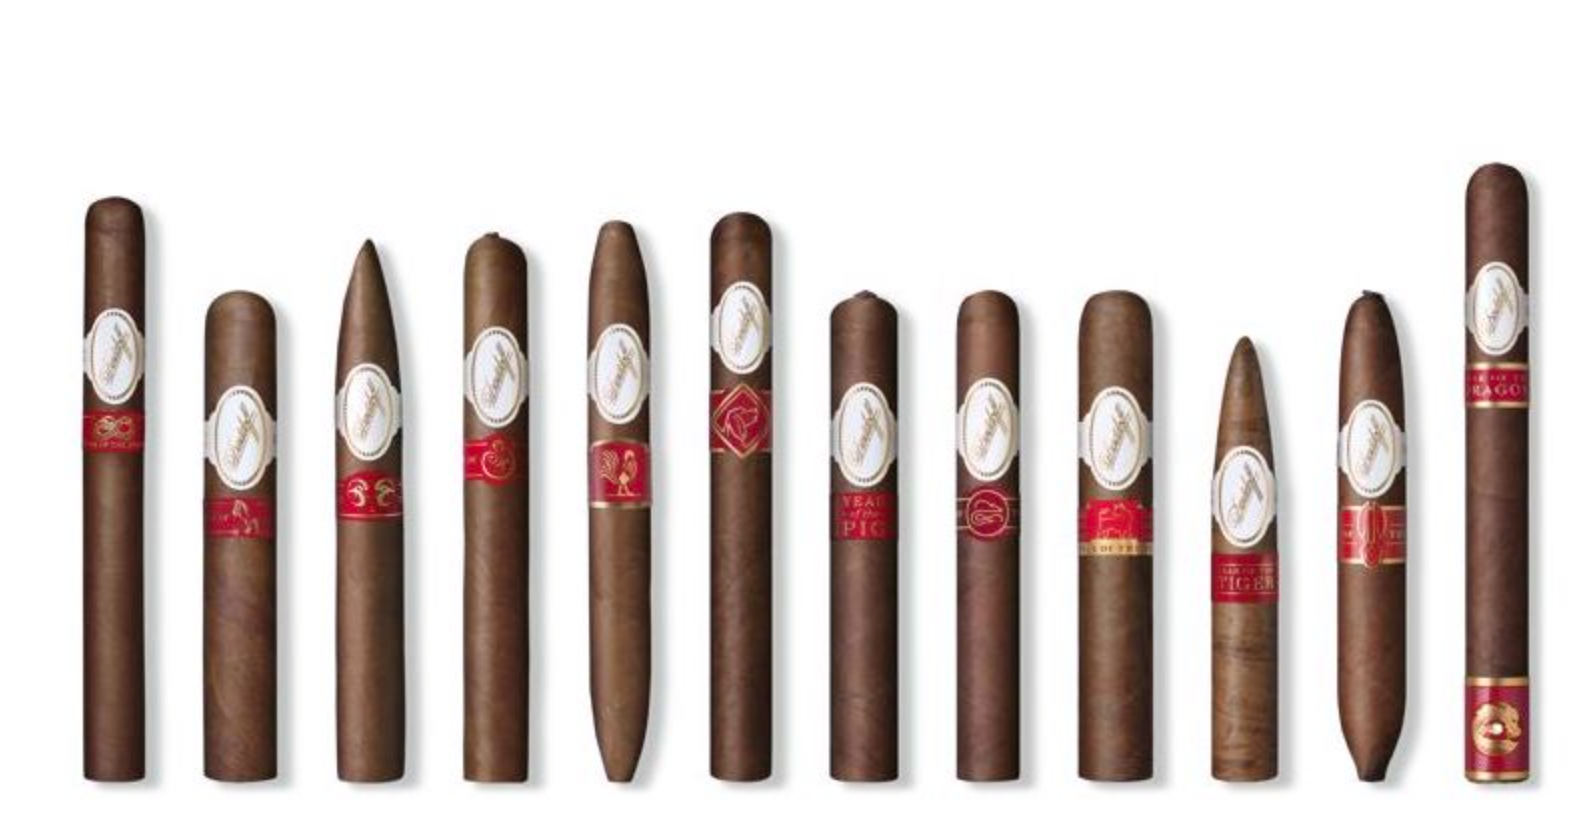 Davidoff Announces The Year of Collectors Edition Containing All Zodiac Releases 12 cigars